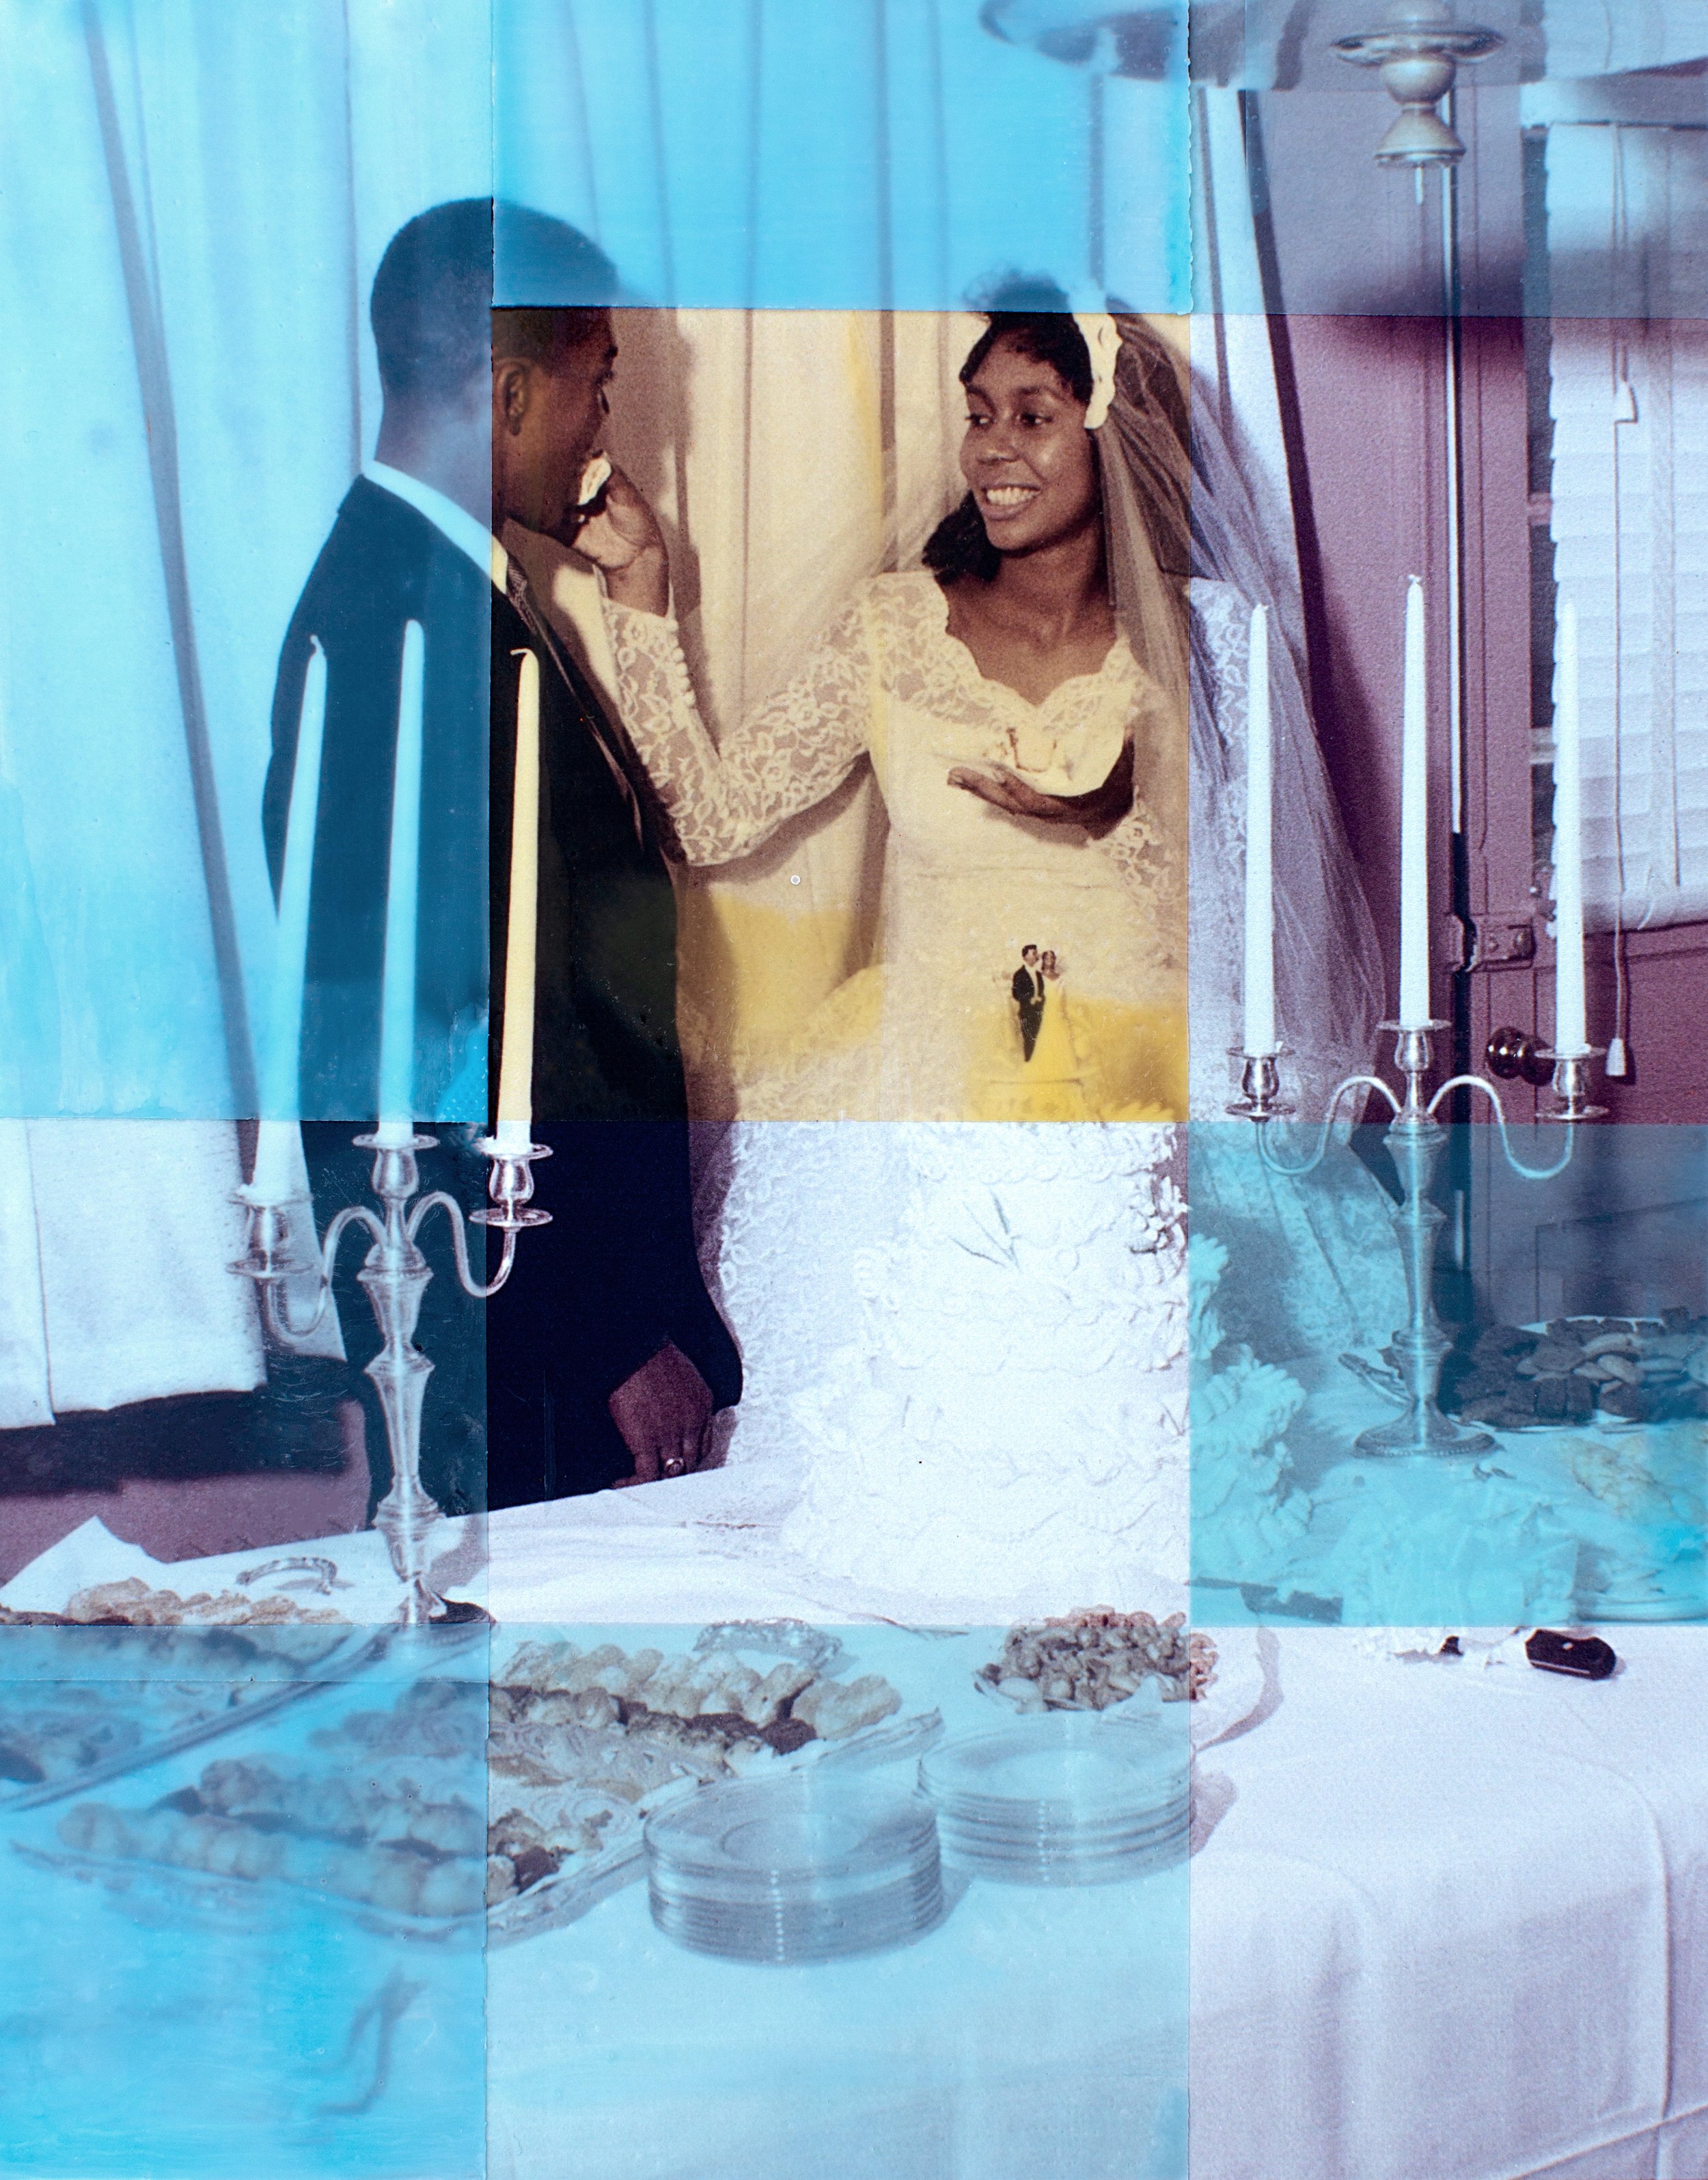  Wedding Cake (1964), 2022  Encaustic wax on archival pigment print on canvas.  Commissioned by The New York Times. 